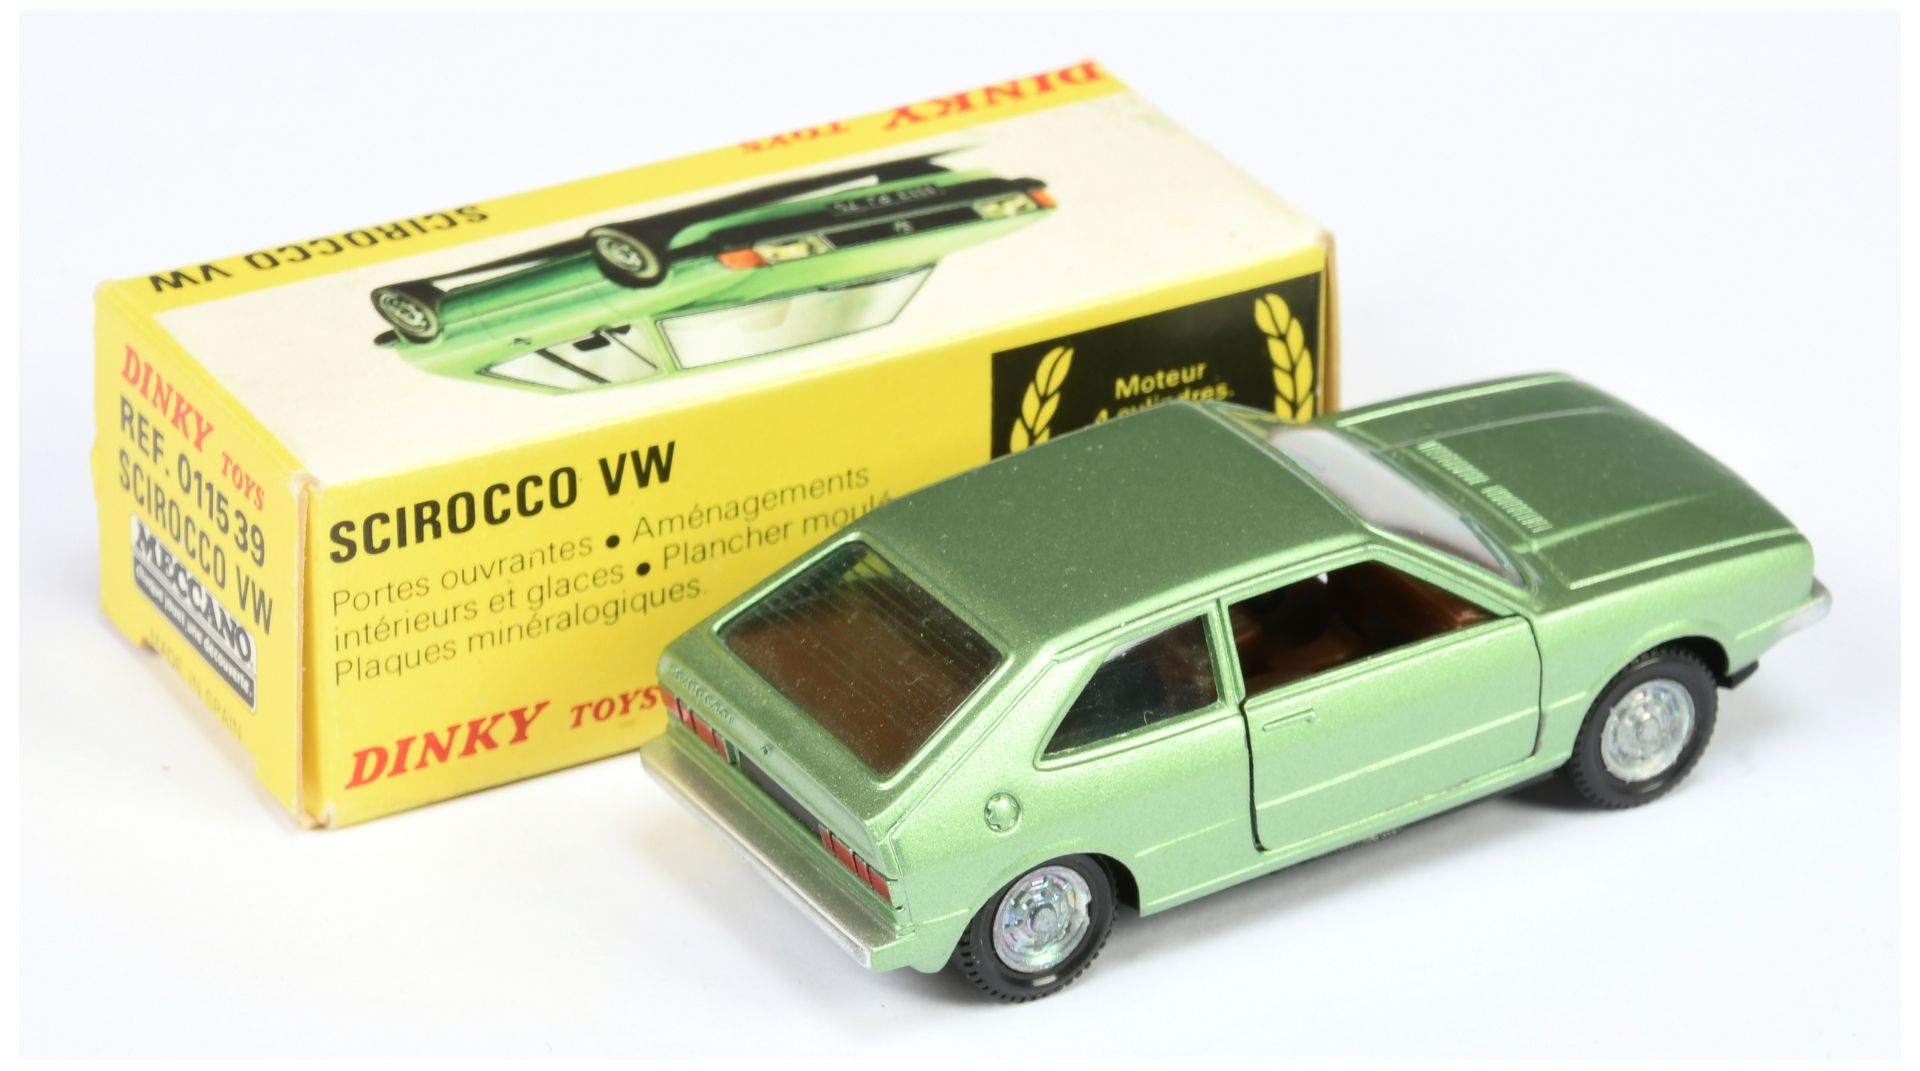 Spanish Dinky Toys 011539 Volkswagen Sirocco - Metallic Green, brown interior, silver trim and ca... - Image 2 of 2